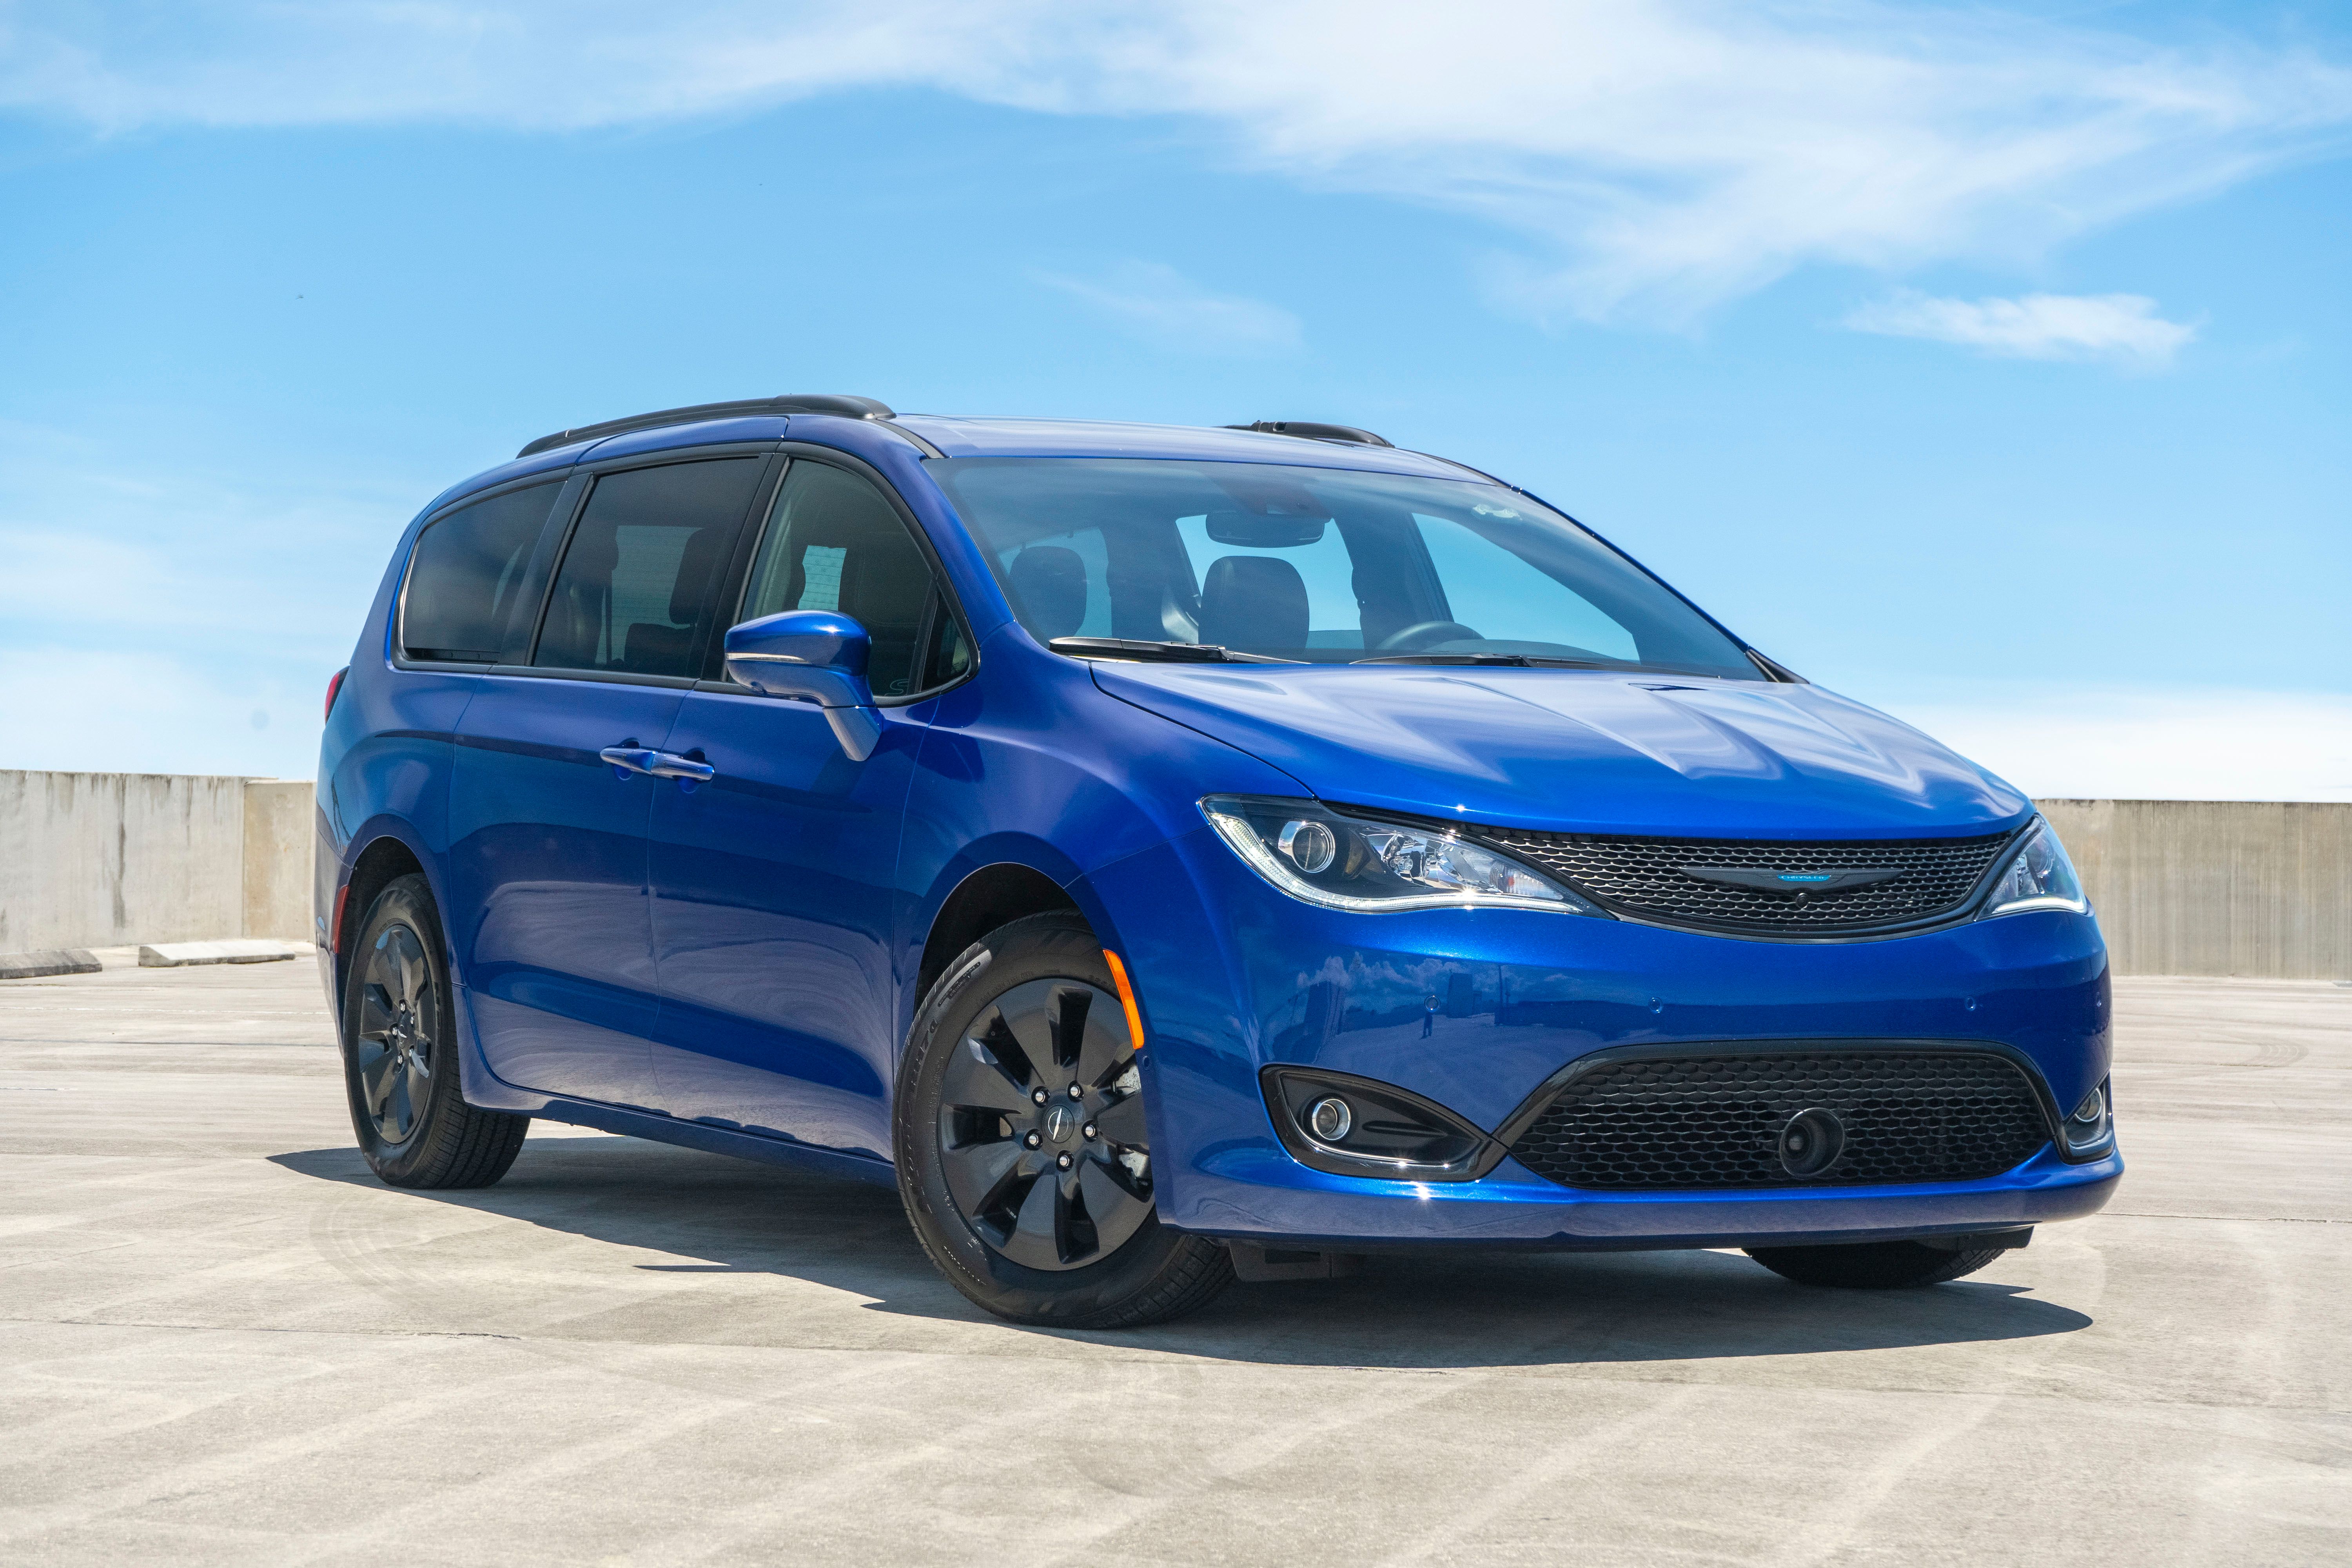 2020 Chrysler Pacifica - Driven